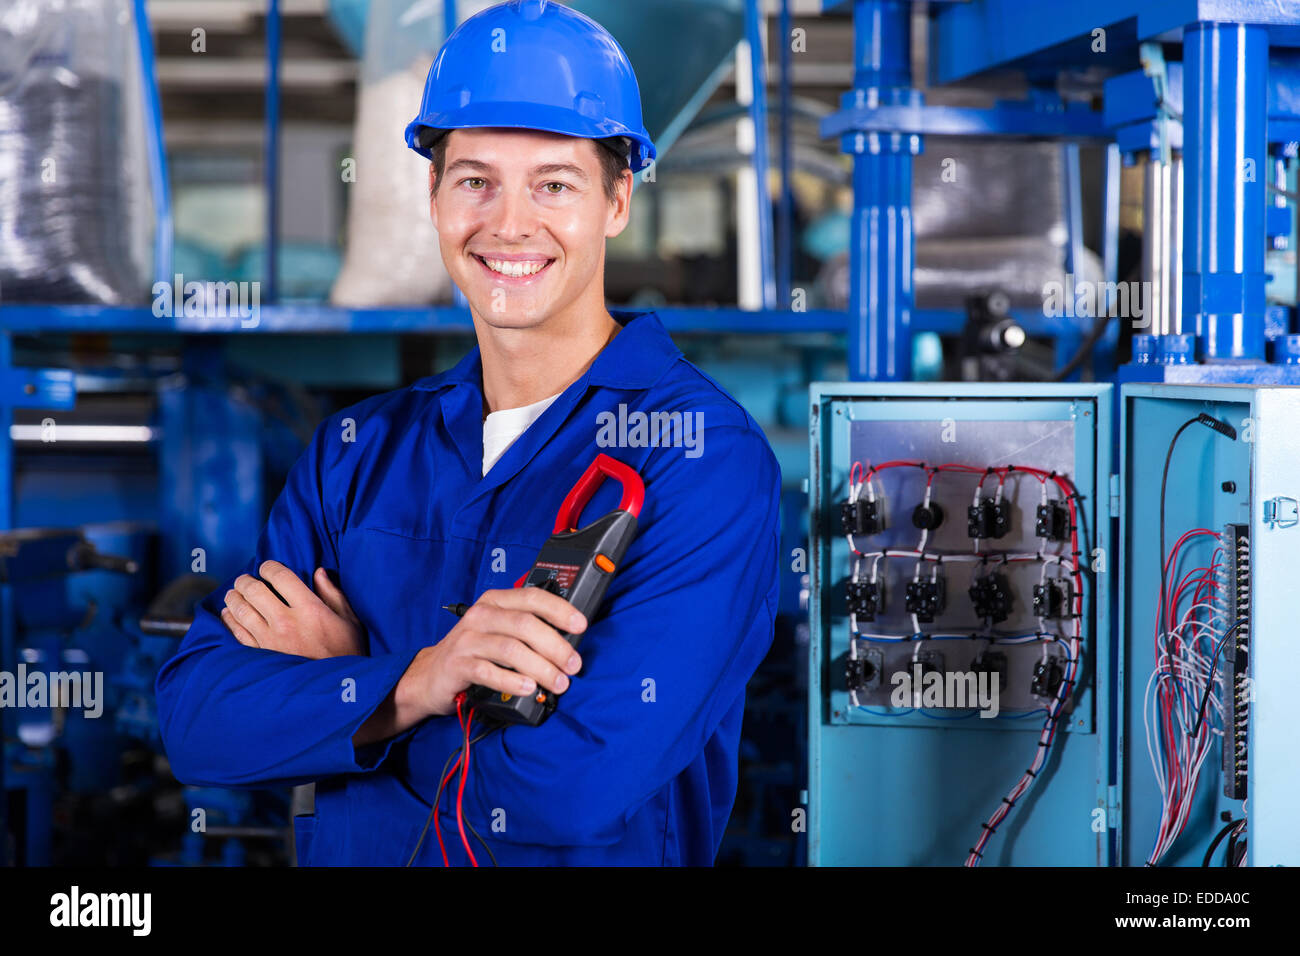 cheerful young industrial technician looking at the camera Stock Photo